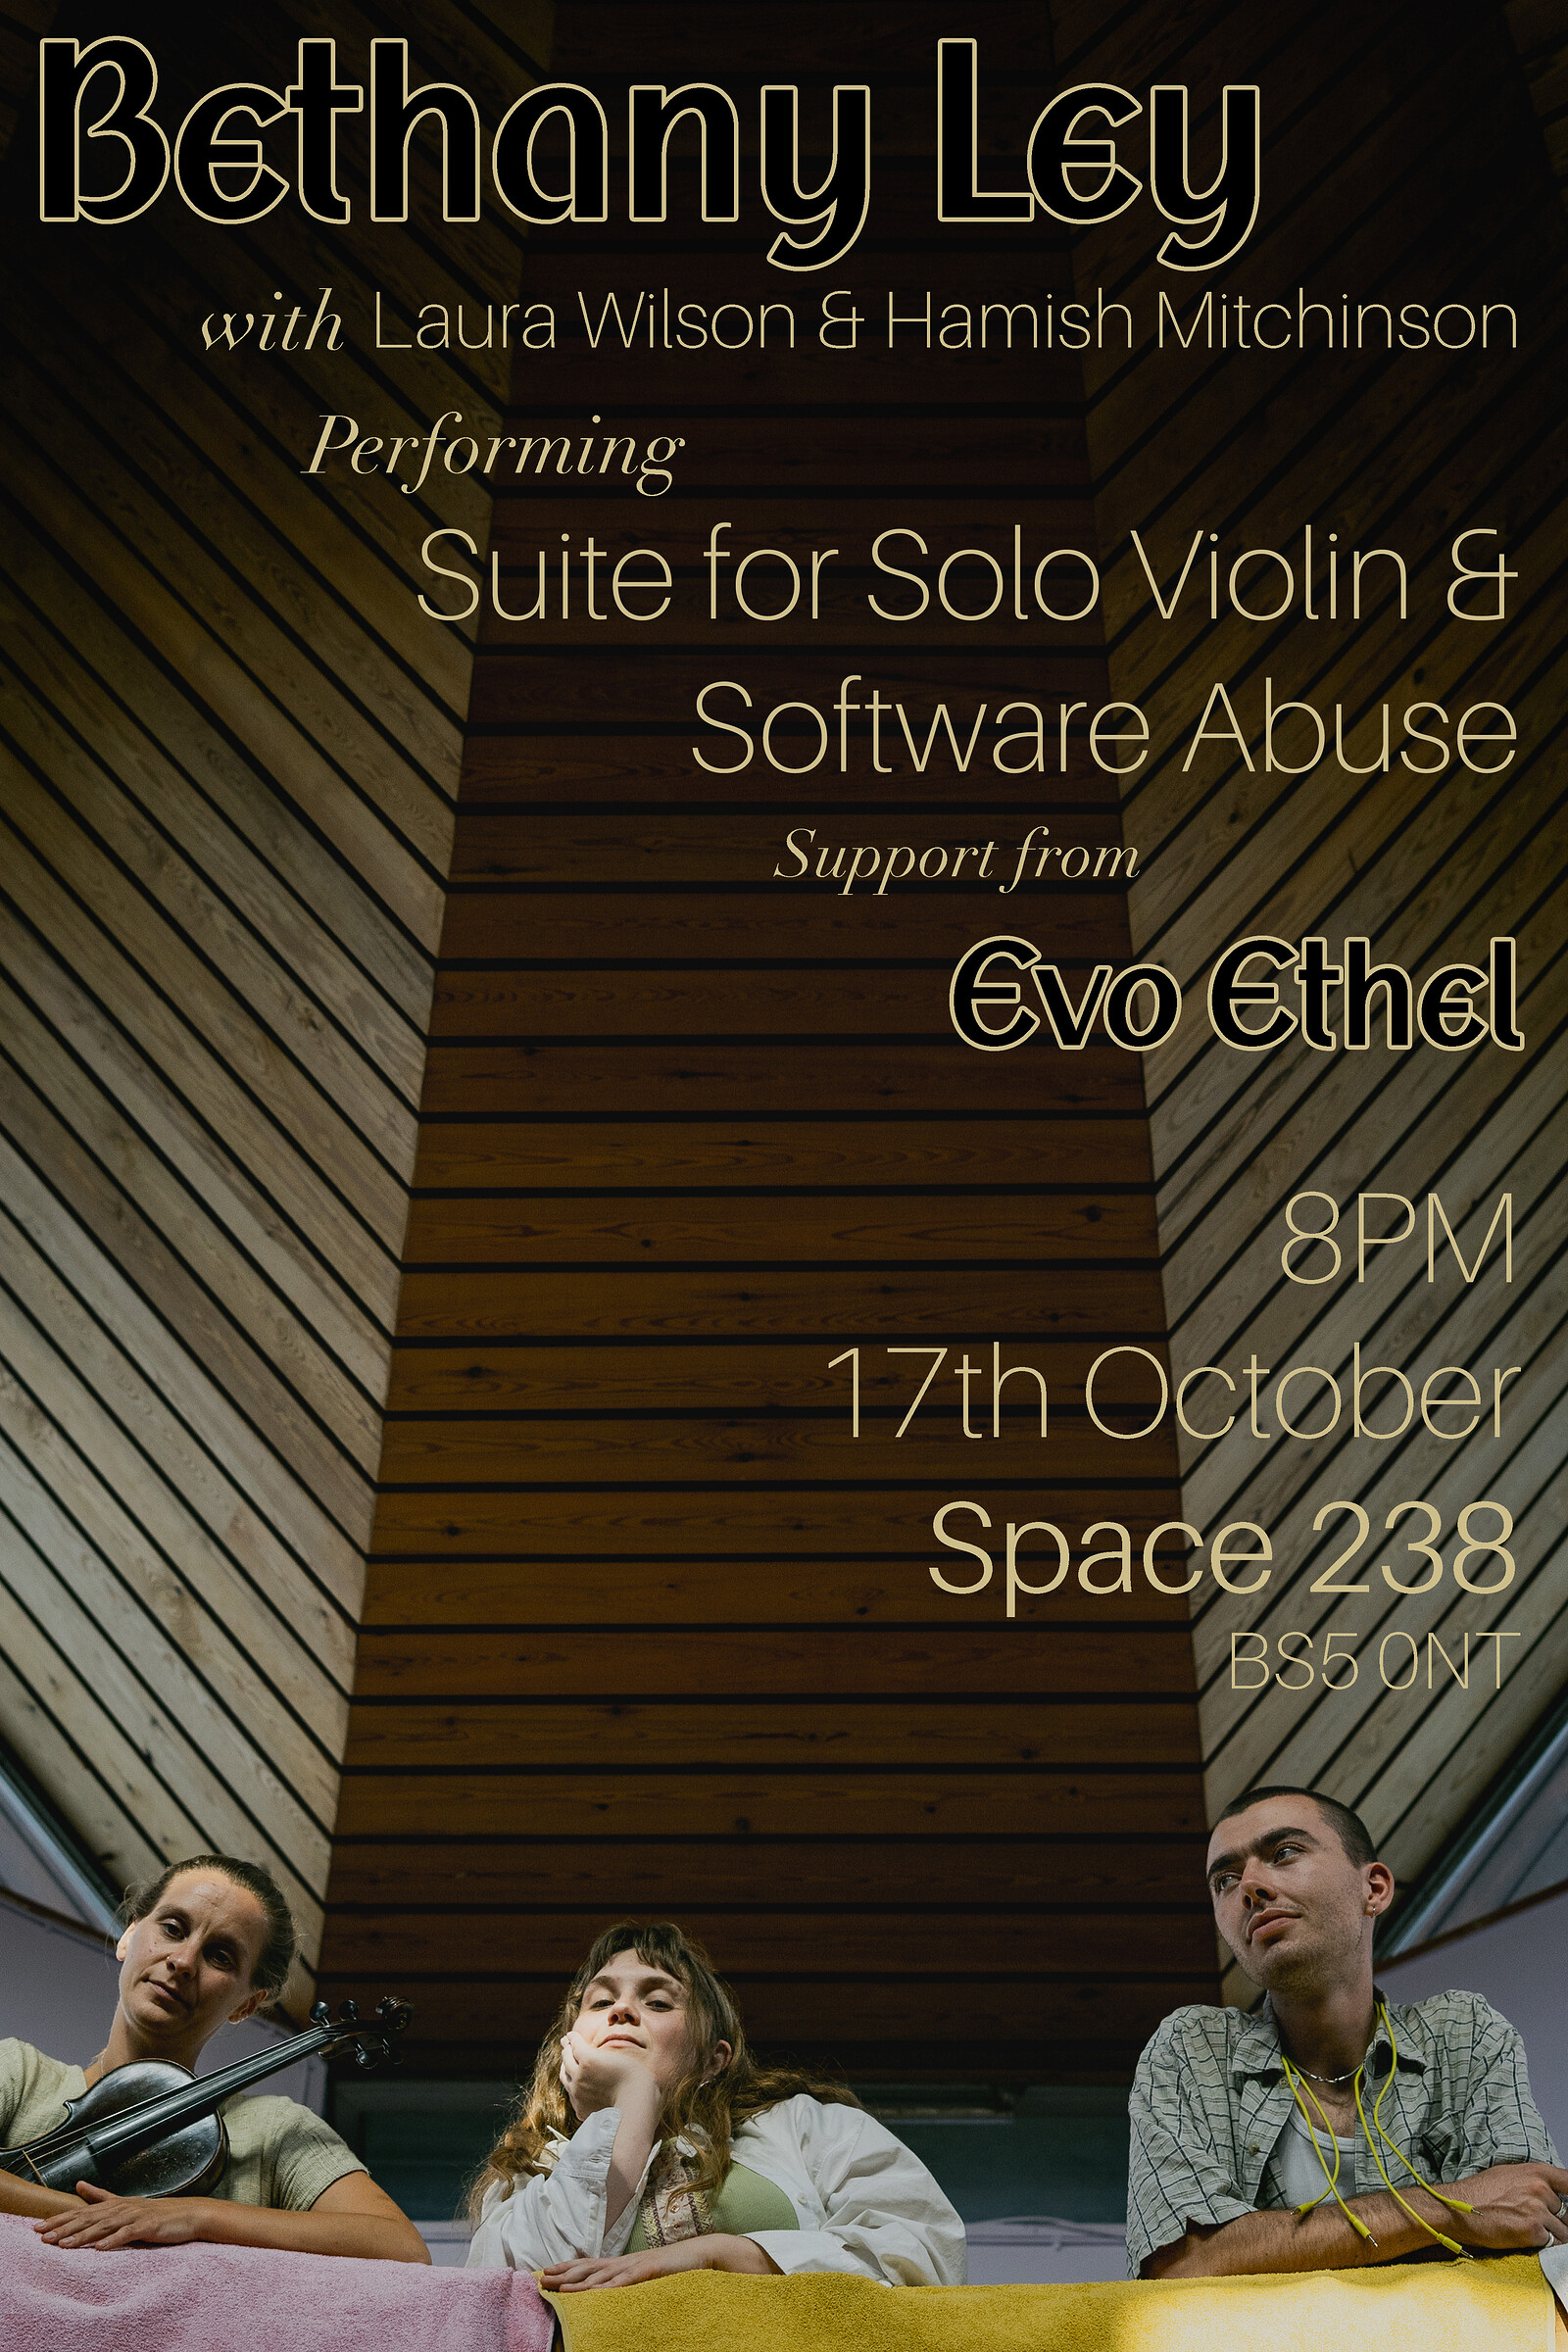 Suite for Solo Violin & Software Abuse at Space 238